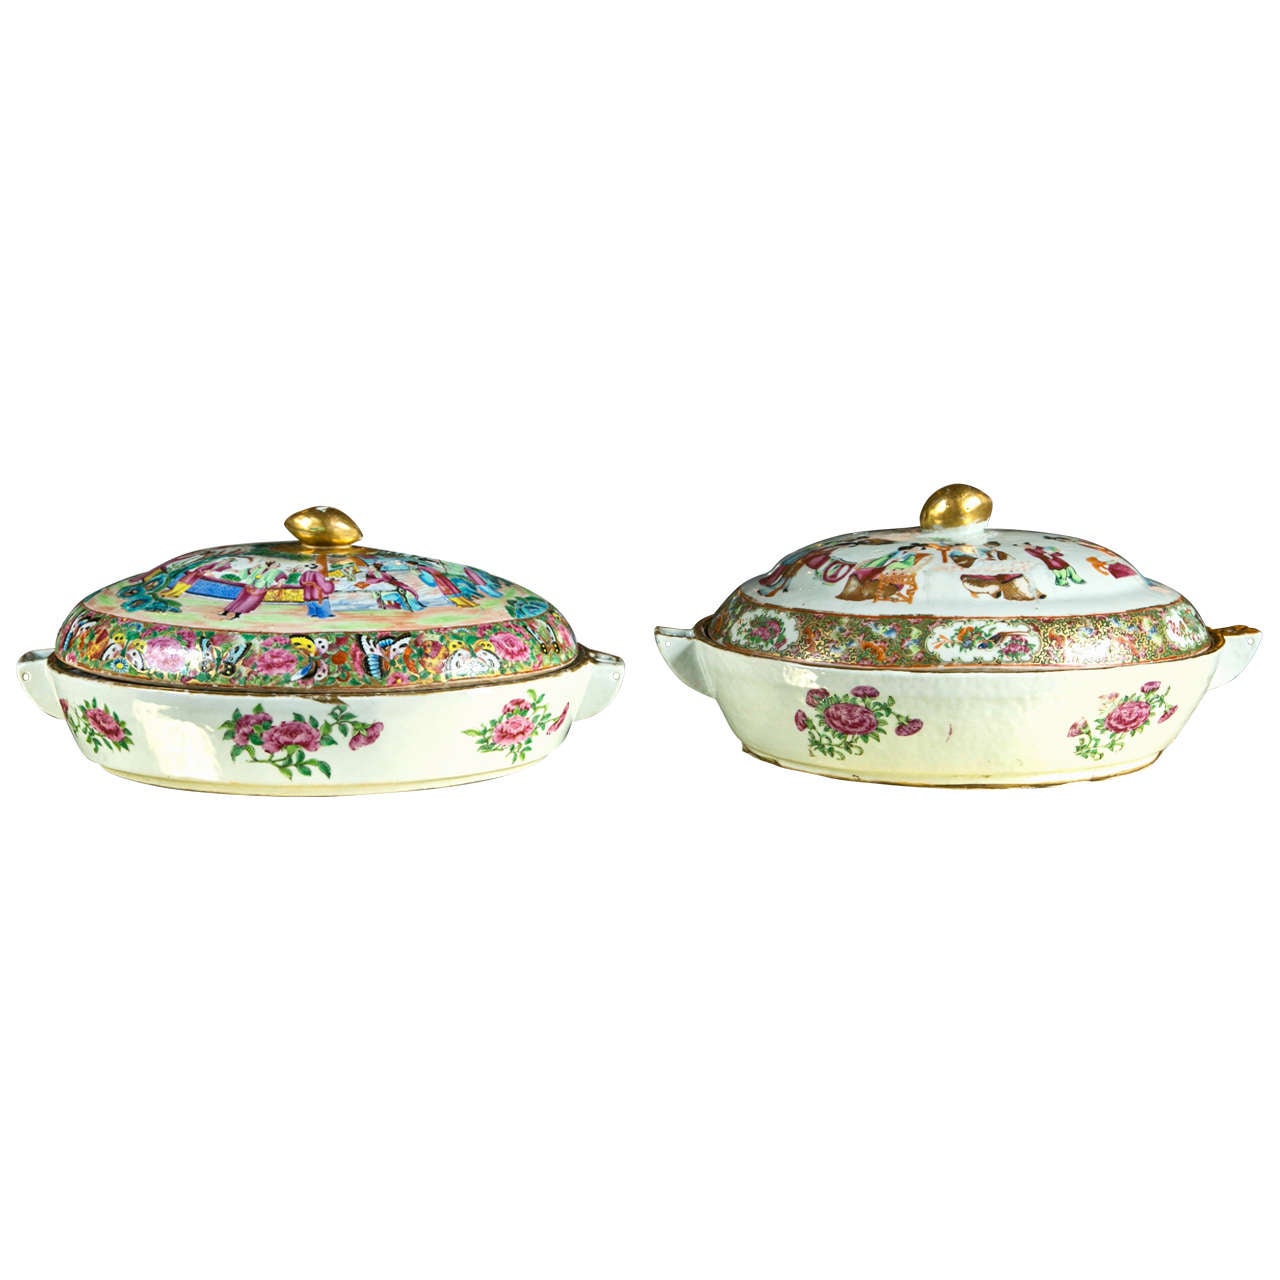 Two 19th Century Chinese Famille Rose Lidded Tureens